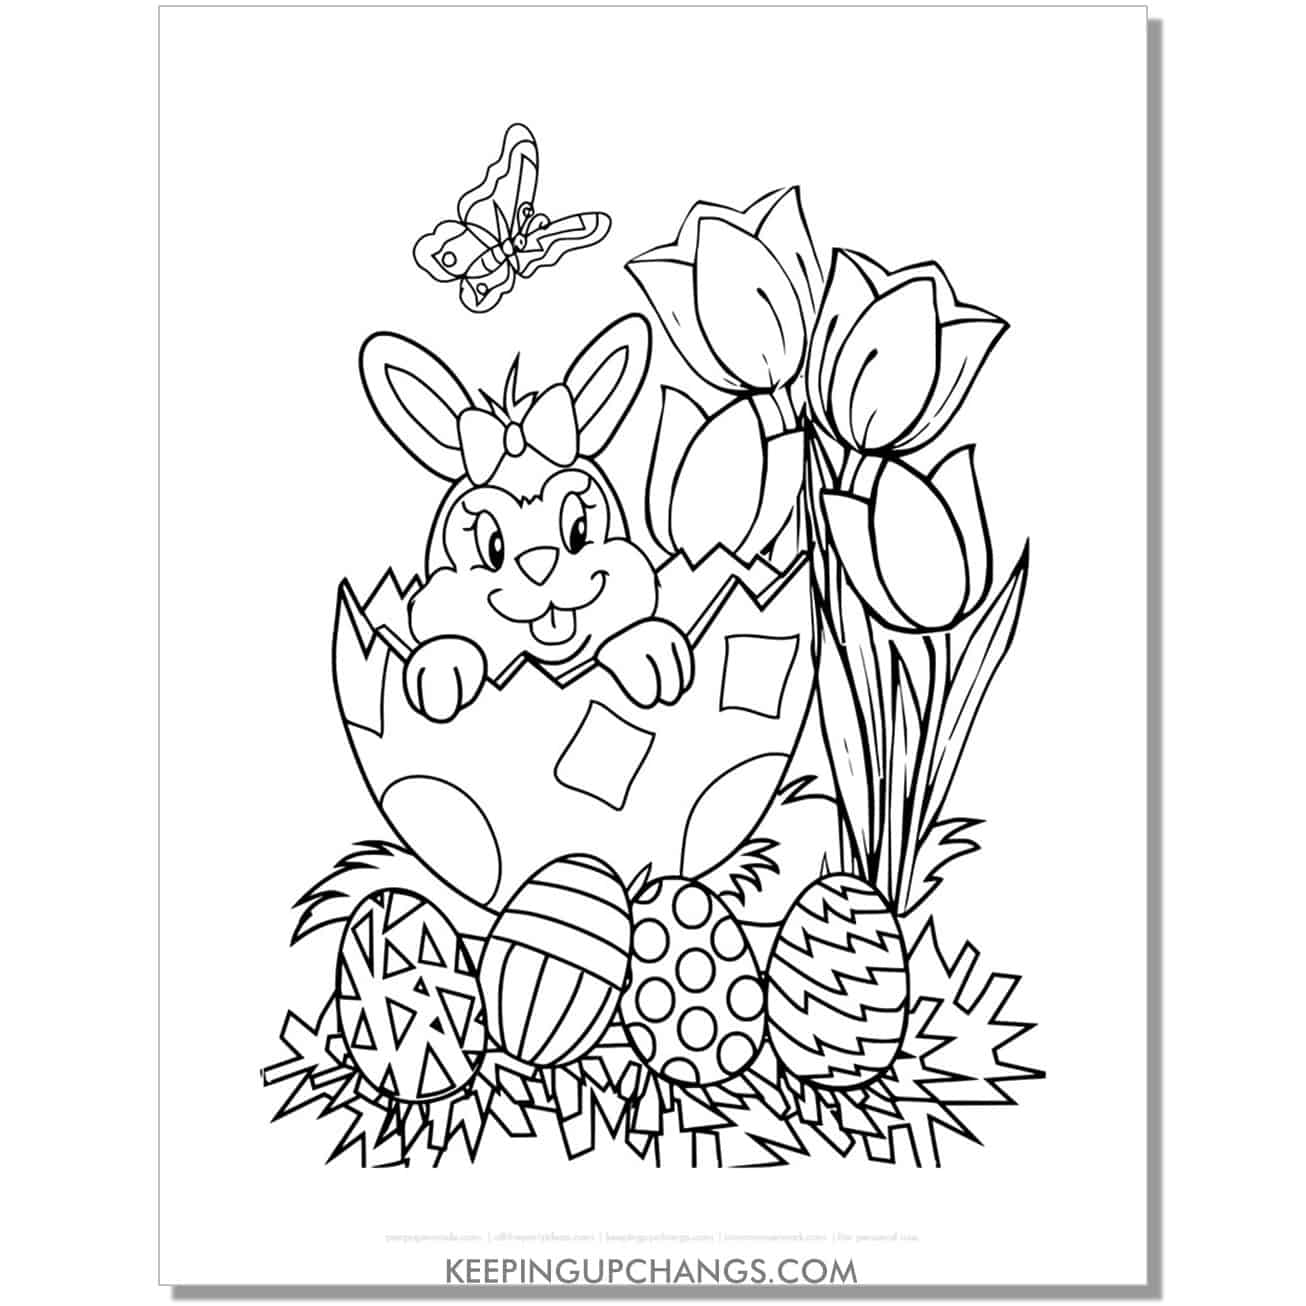 easter bunny in egg shell with flowers, butterfly coloring page, sheet.